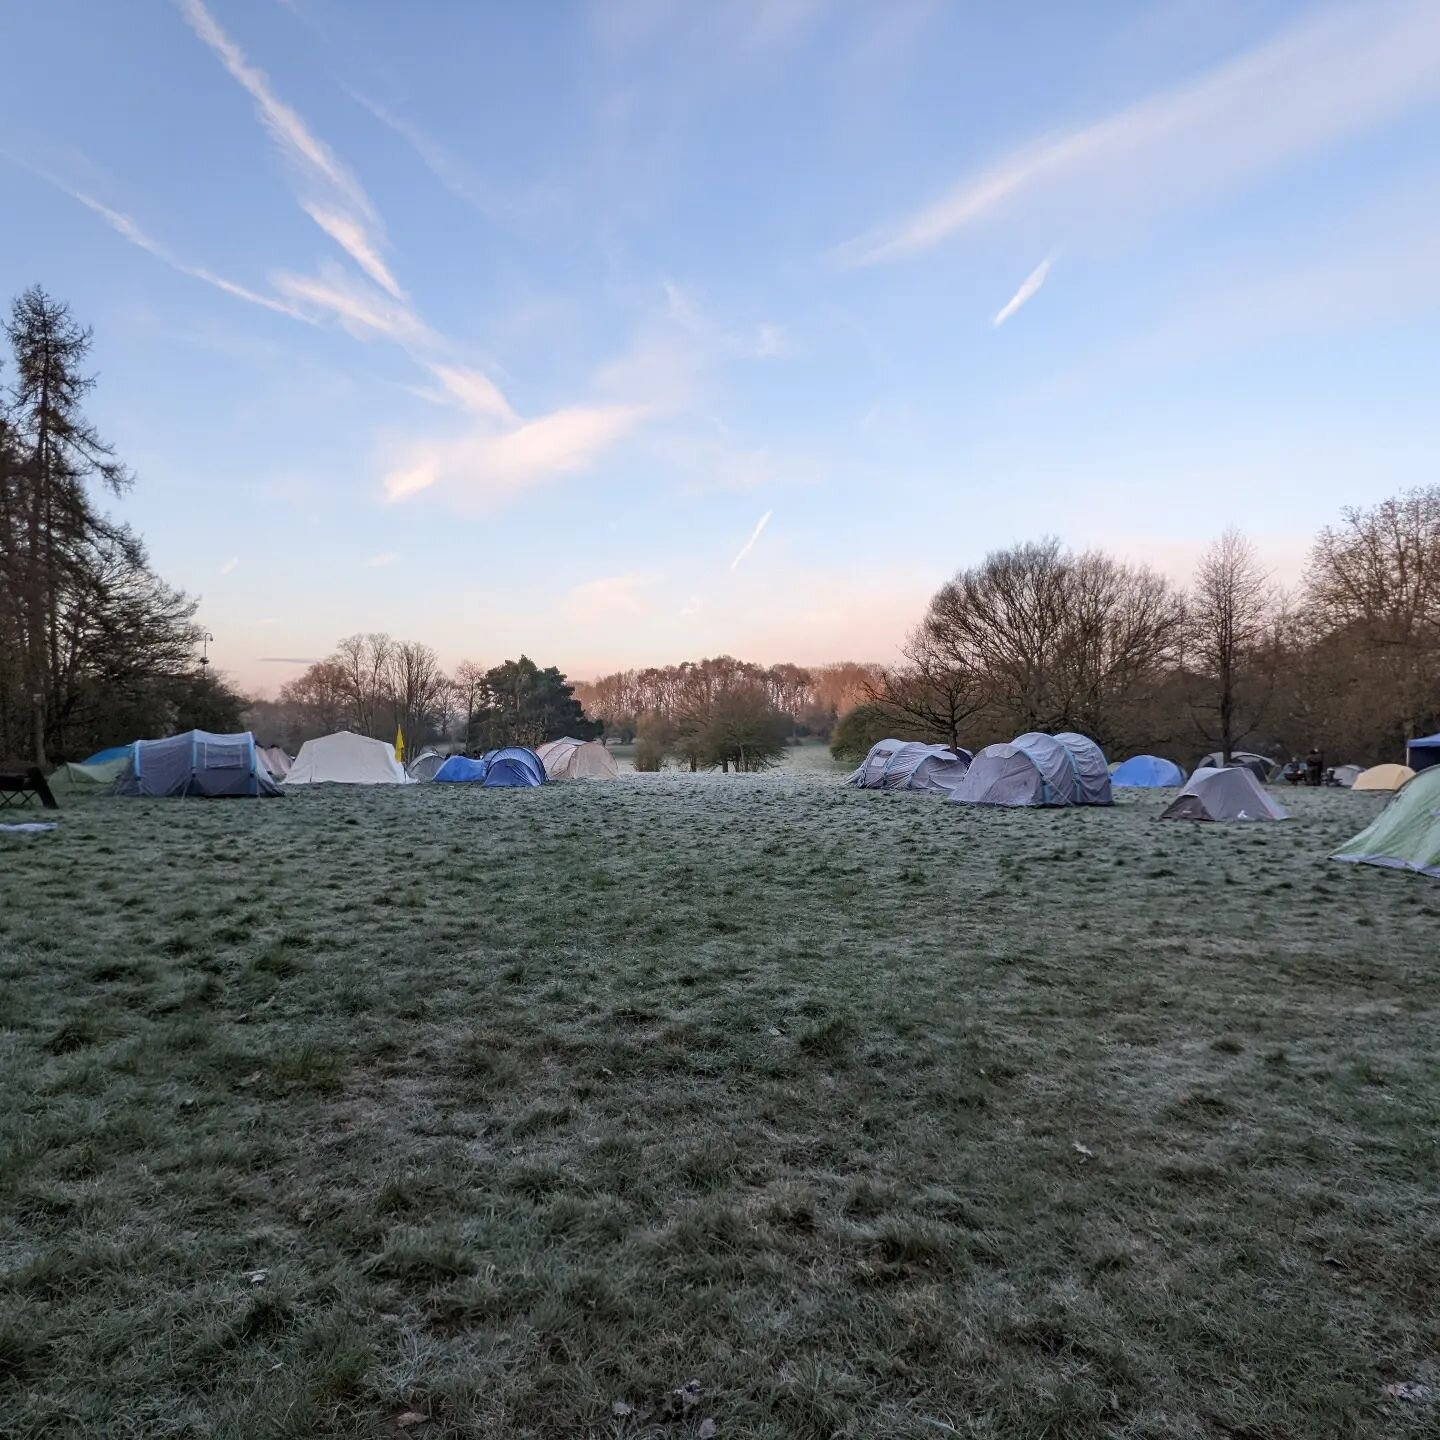 Good morning from @phaselswood We have over 100 young people from Beavers to Explorers at our District Camp this weekend.